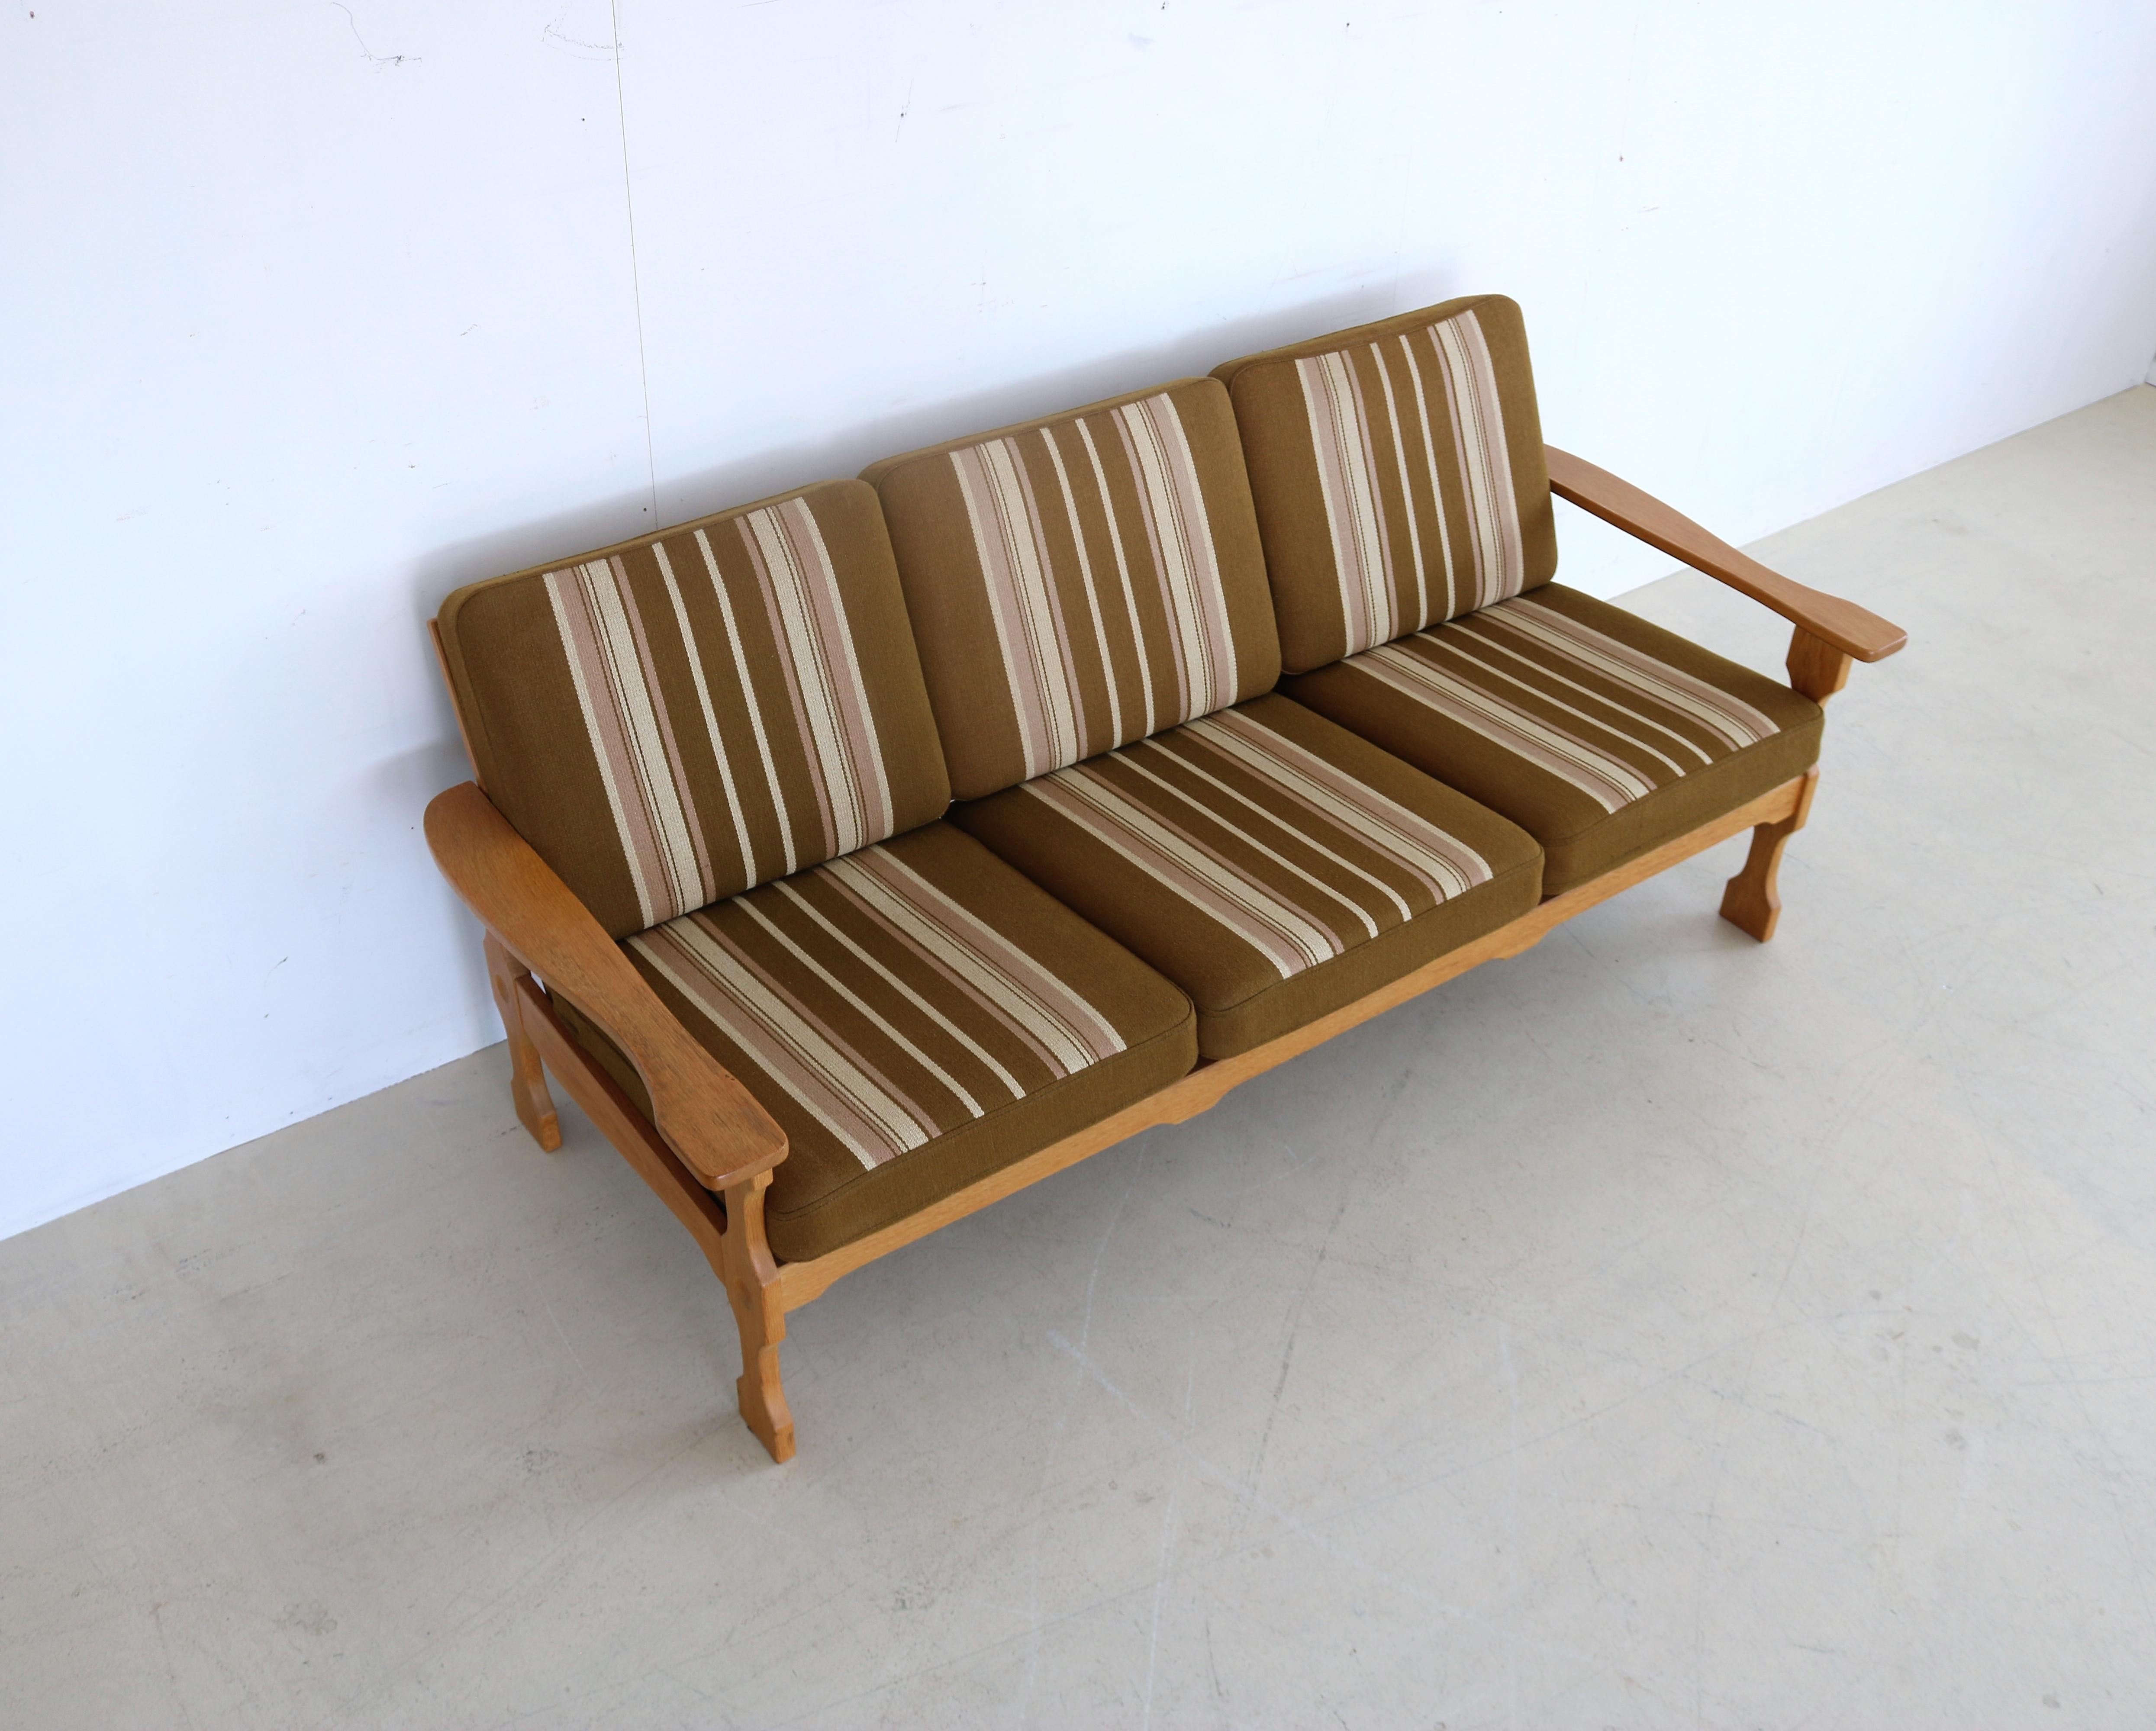 Vintage Oak Seating Area Couch Easy Chairs, 1950s, Danish For Sale 3